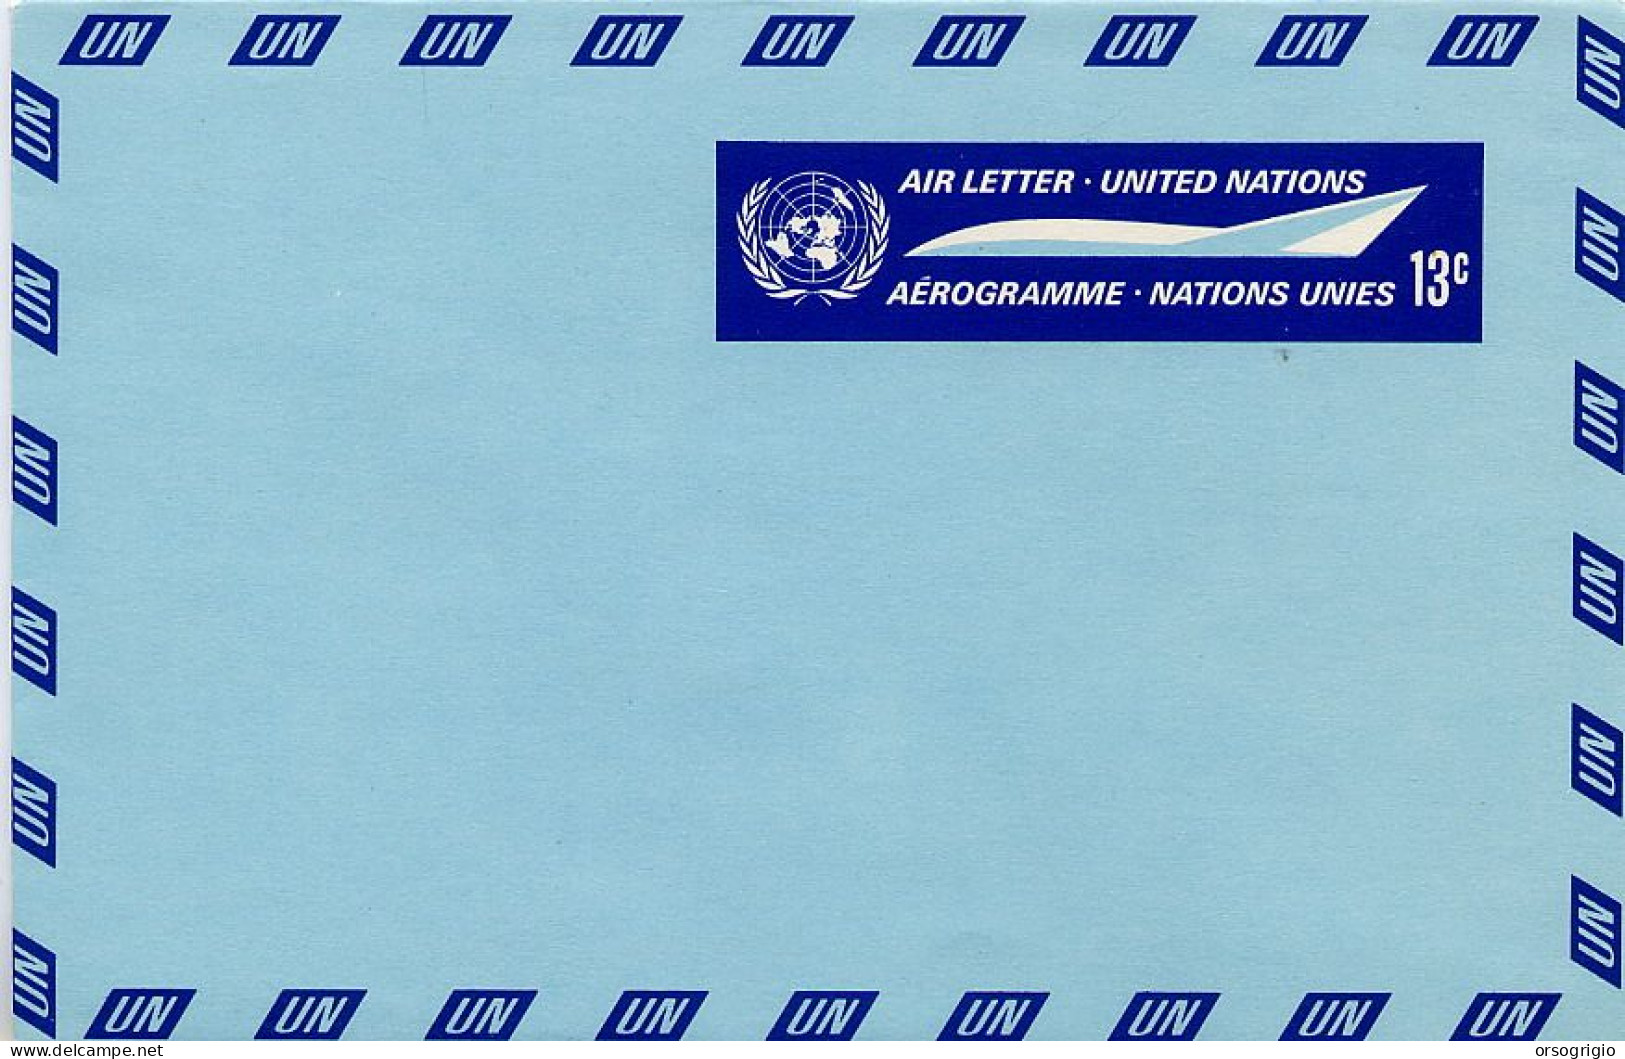 ONU - UNITED NATIONS - NATIONS UNIES -  N° 6 Covers - Collections, Lots & Séries